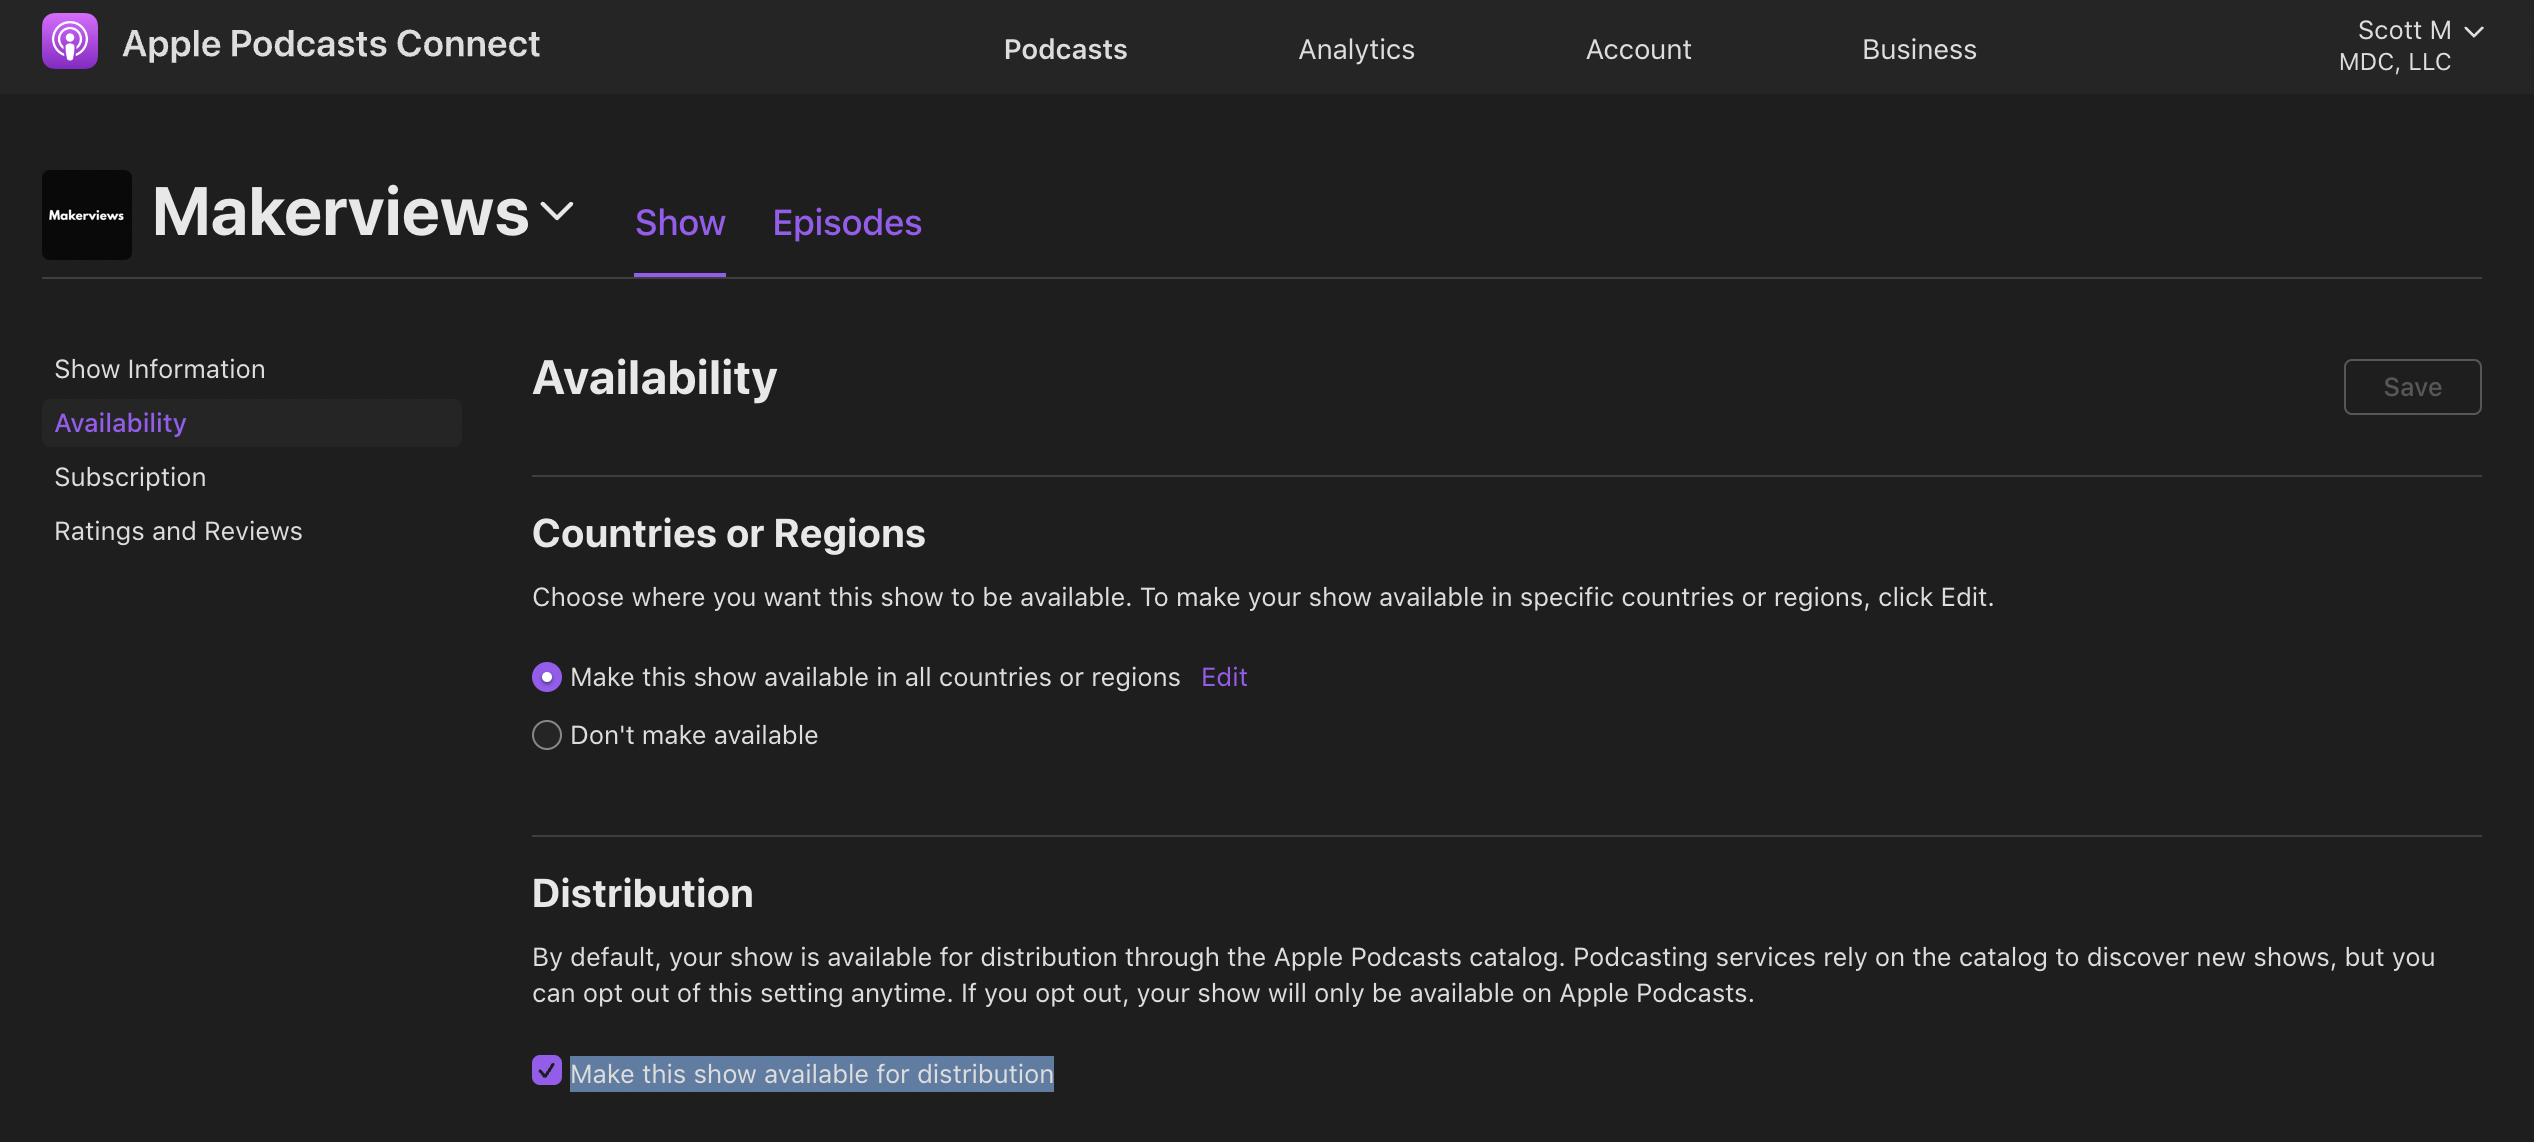 Apple Podcasts Connect screenshot highlighting podcast distribution availability setting checked